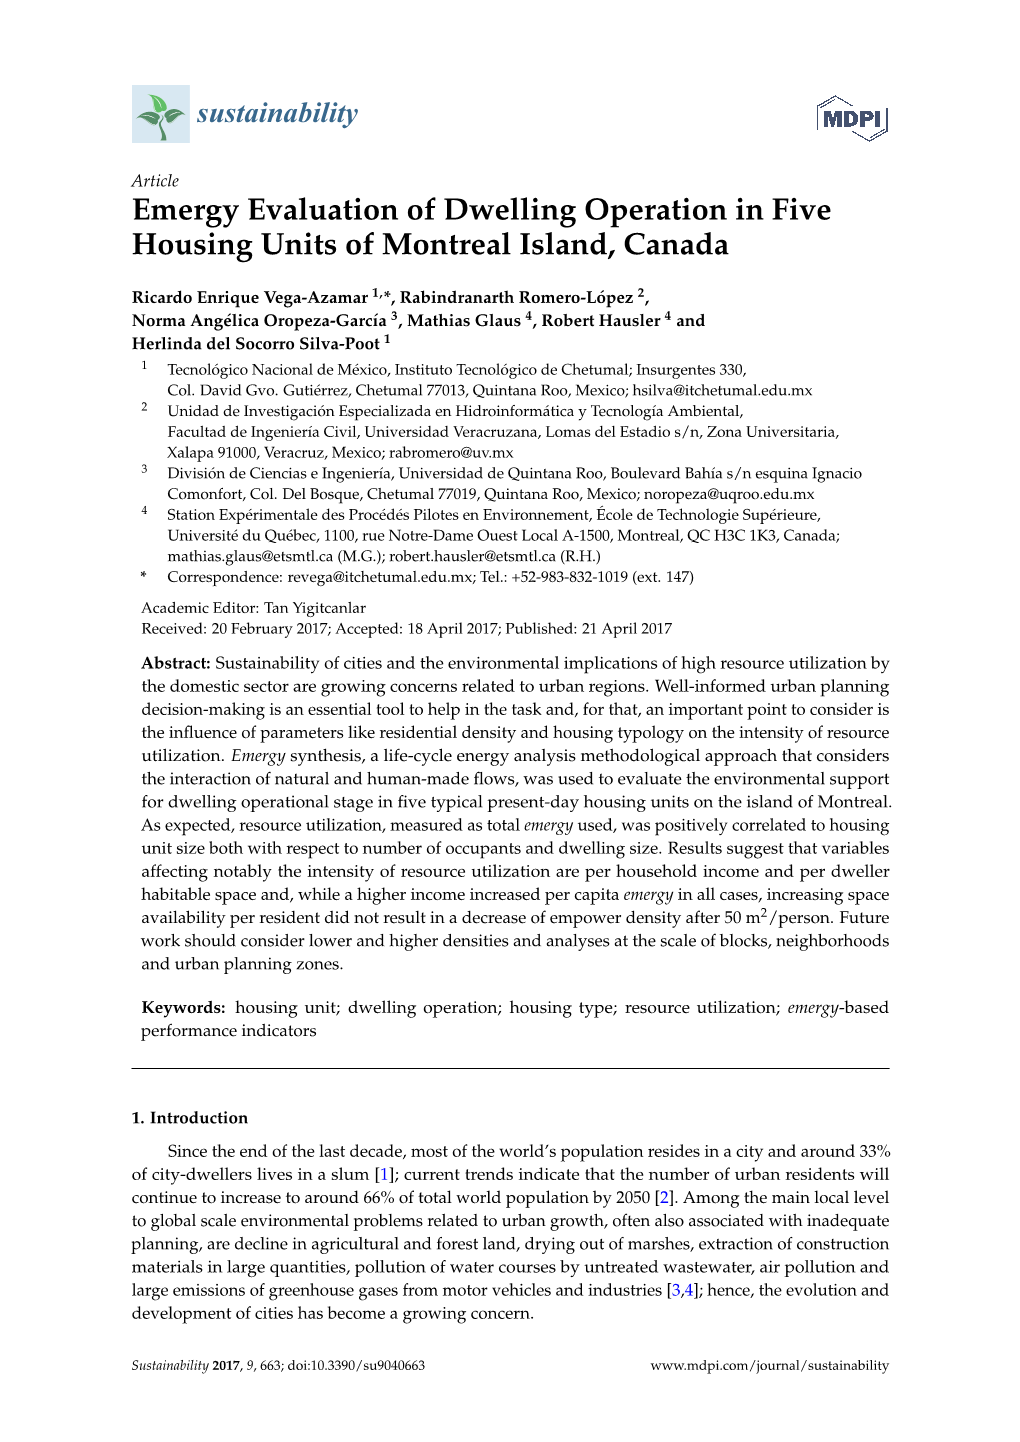 Emergy Evaluation of Dwelling Operation in Five Housing Units of Montreal Island, Canada